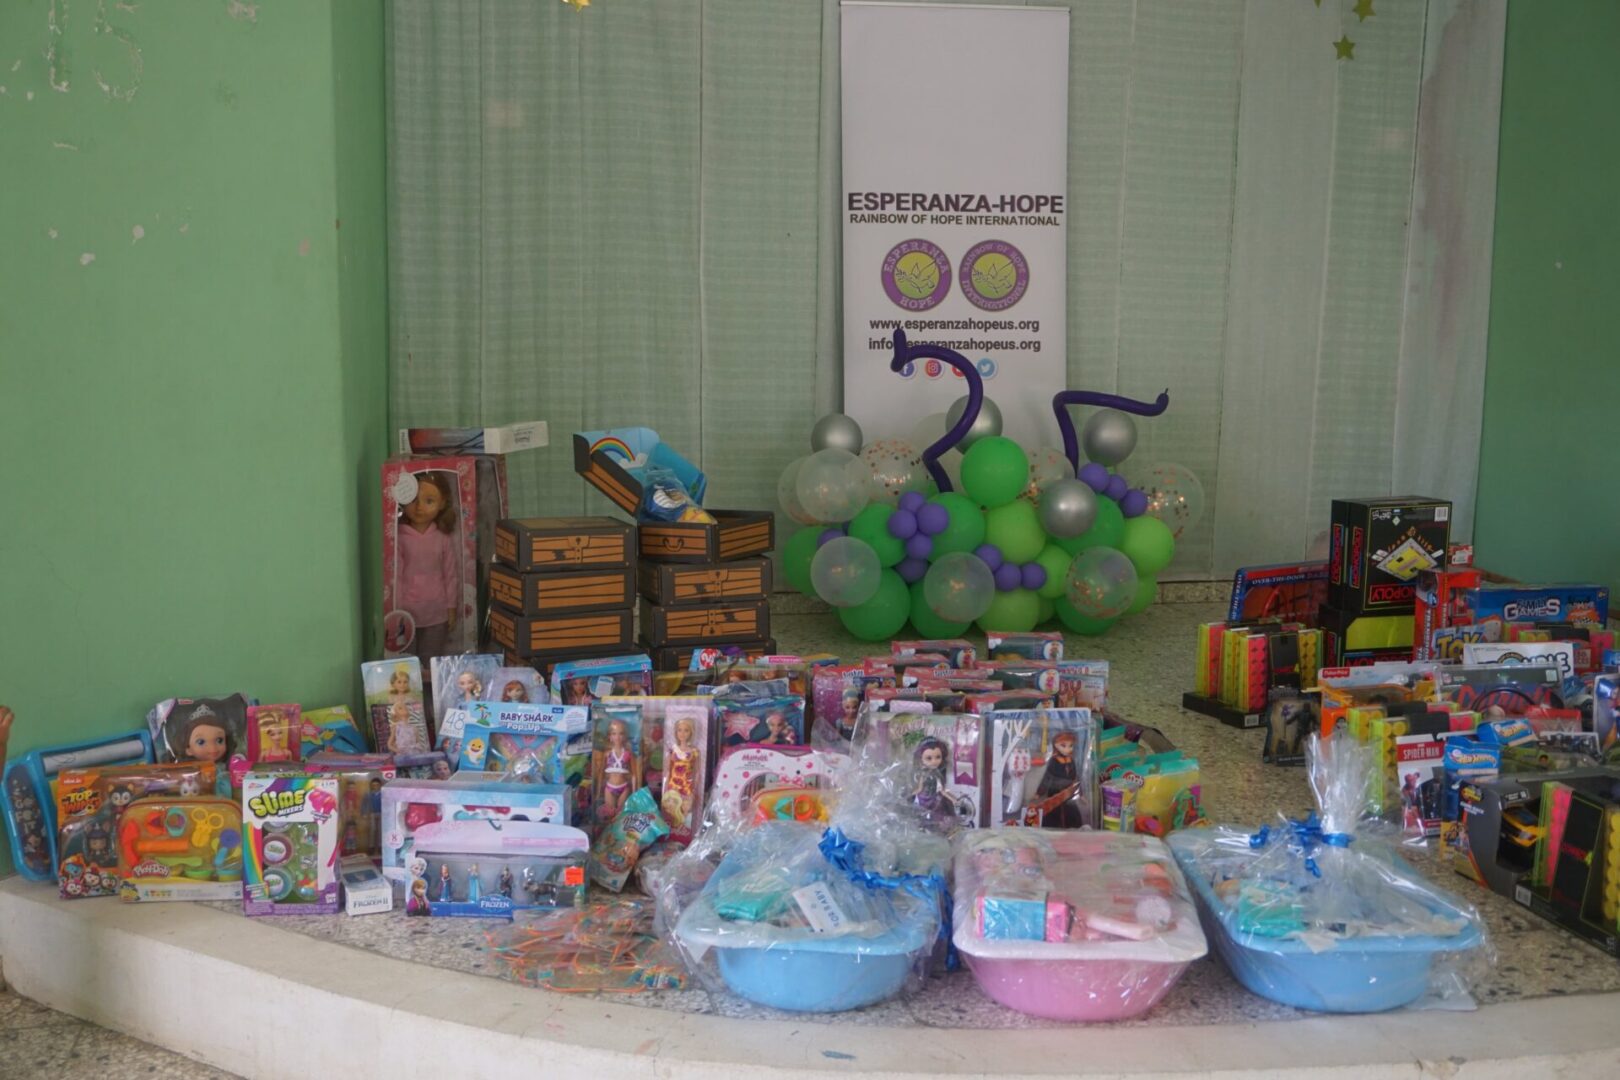 A platform full of various toys and baskets of baby supplies